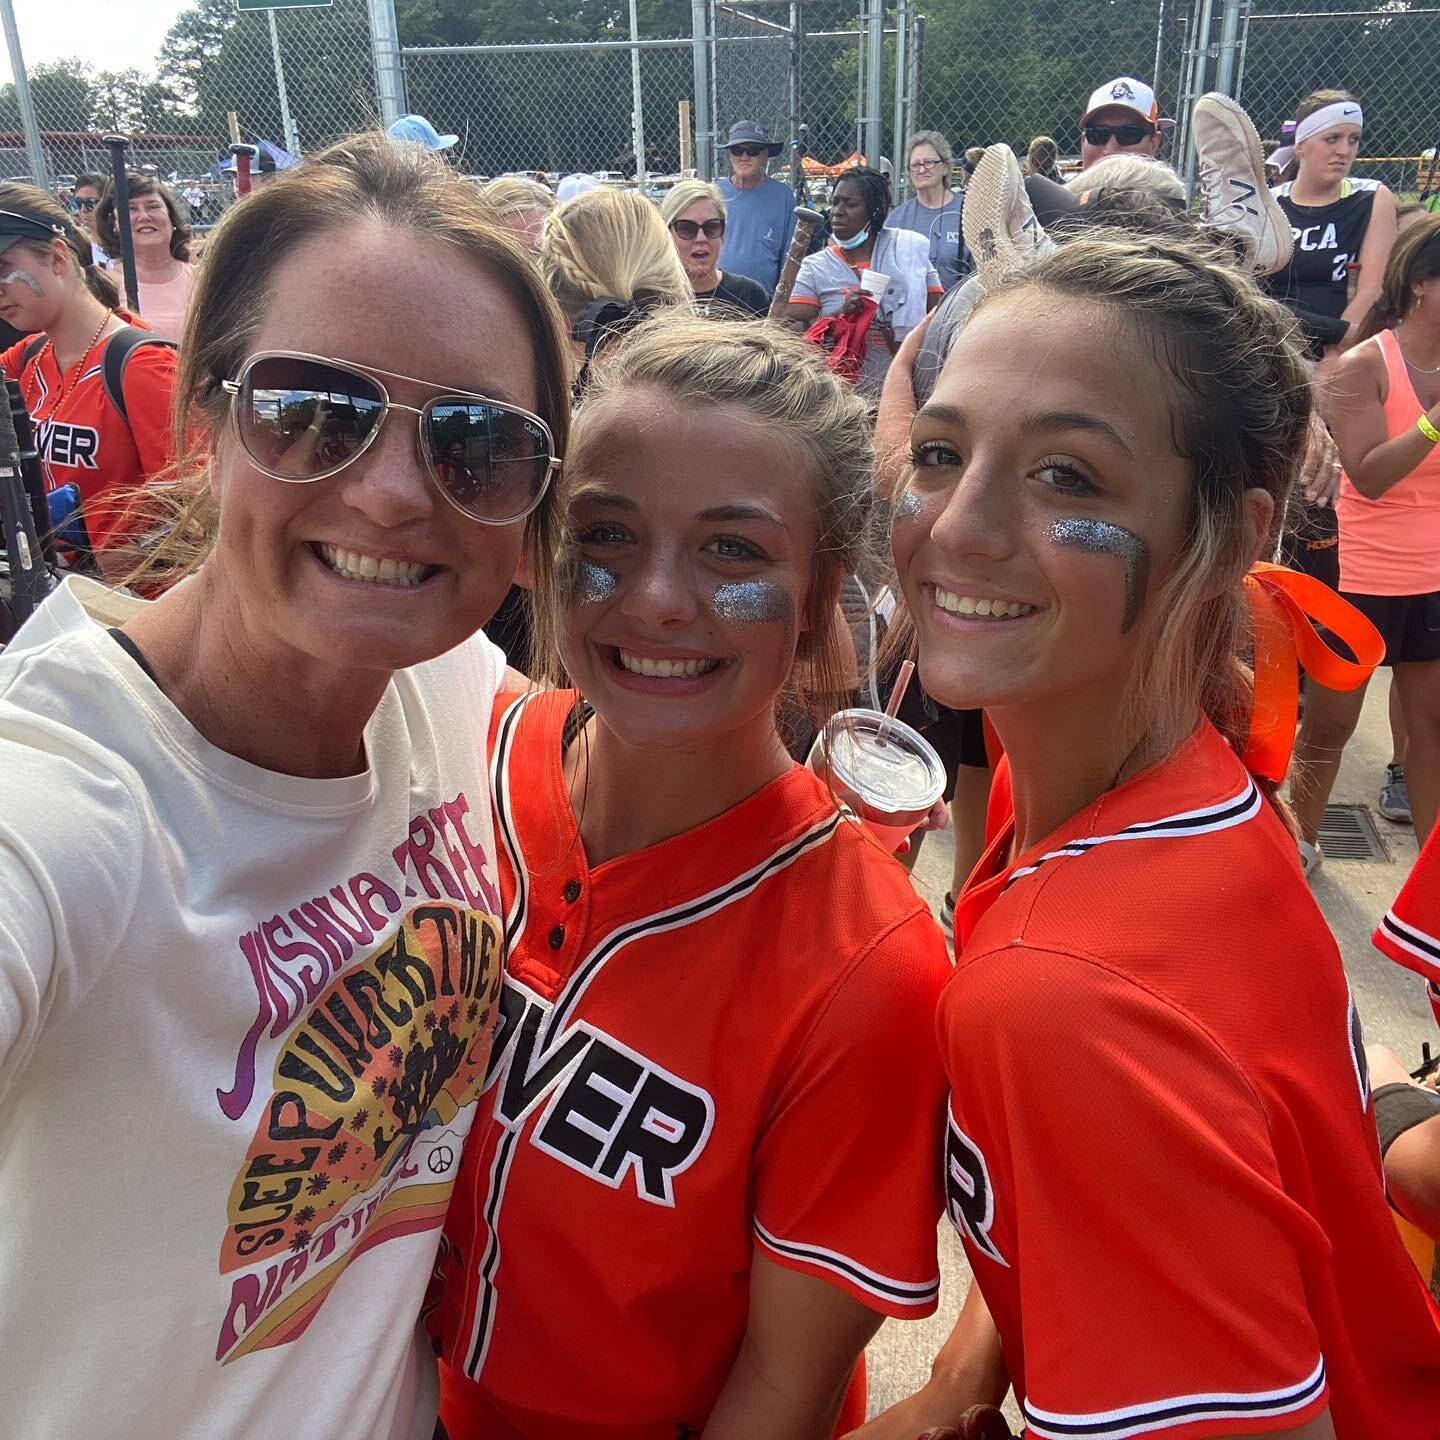 I love close intense games and you ladies pulled it off! Let&rsquo;s go!! #hooverbucs #hooversoftball #fosterfastpitch #statebound @brookelyn.cannon @olivia.christian02